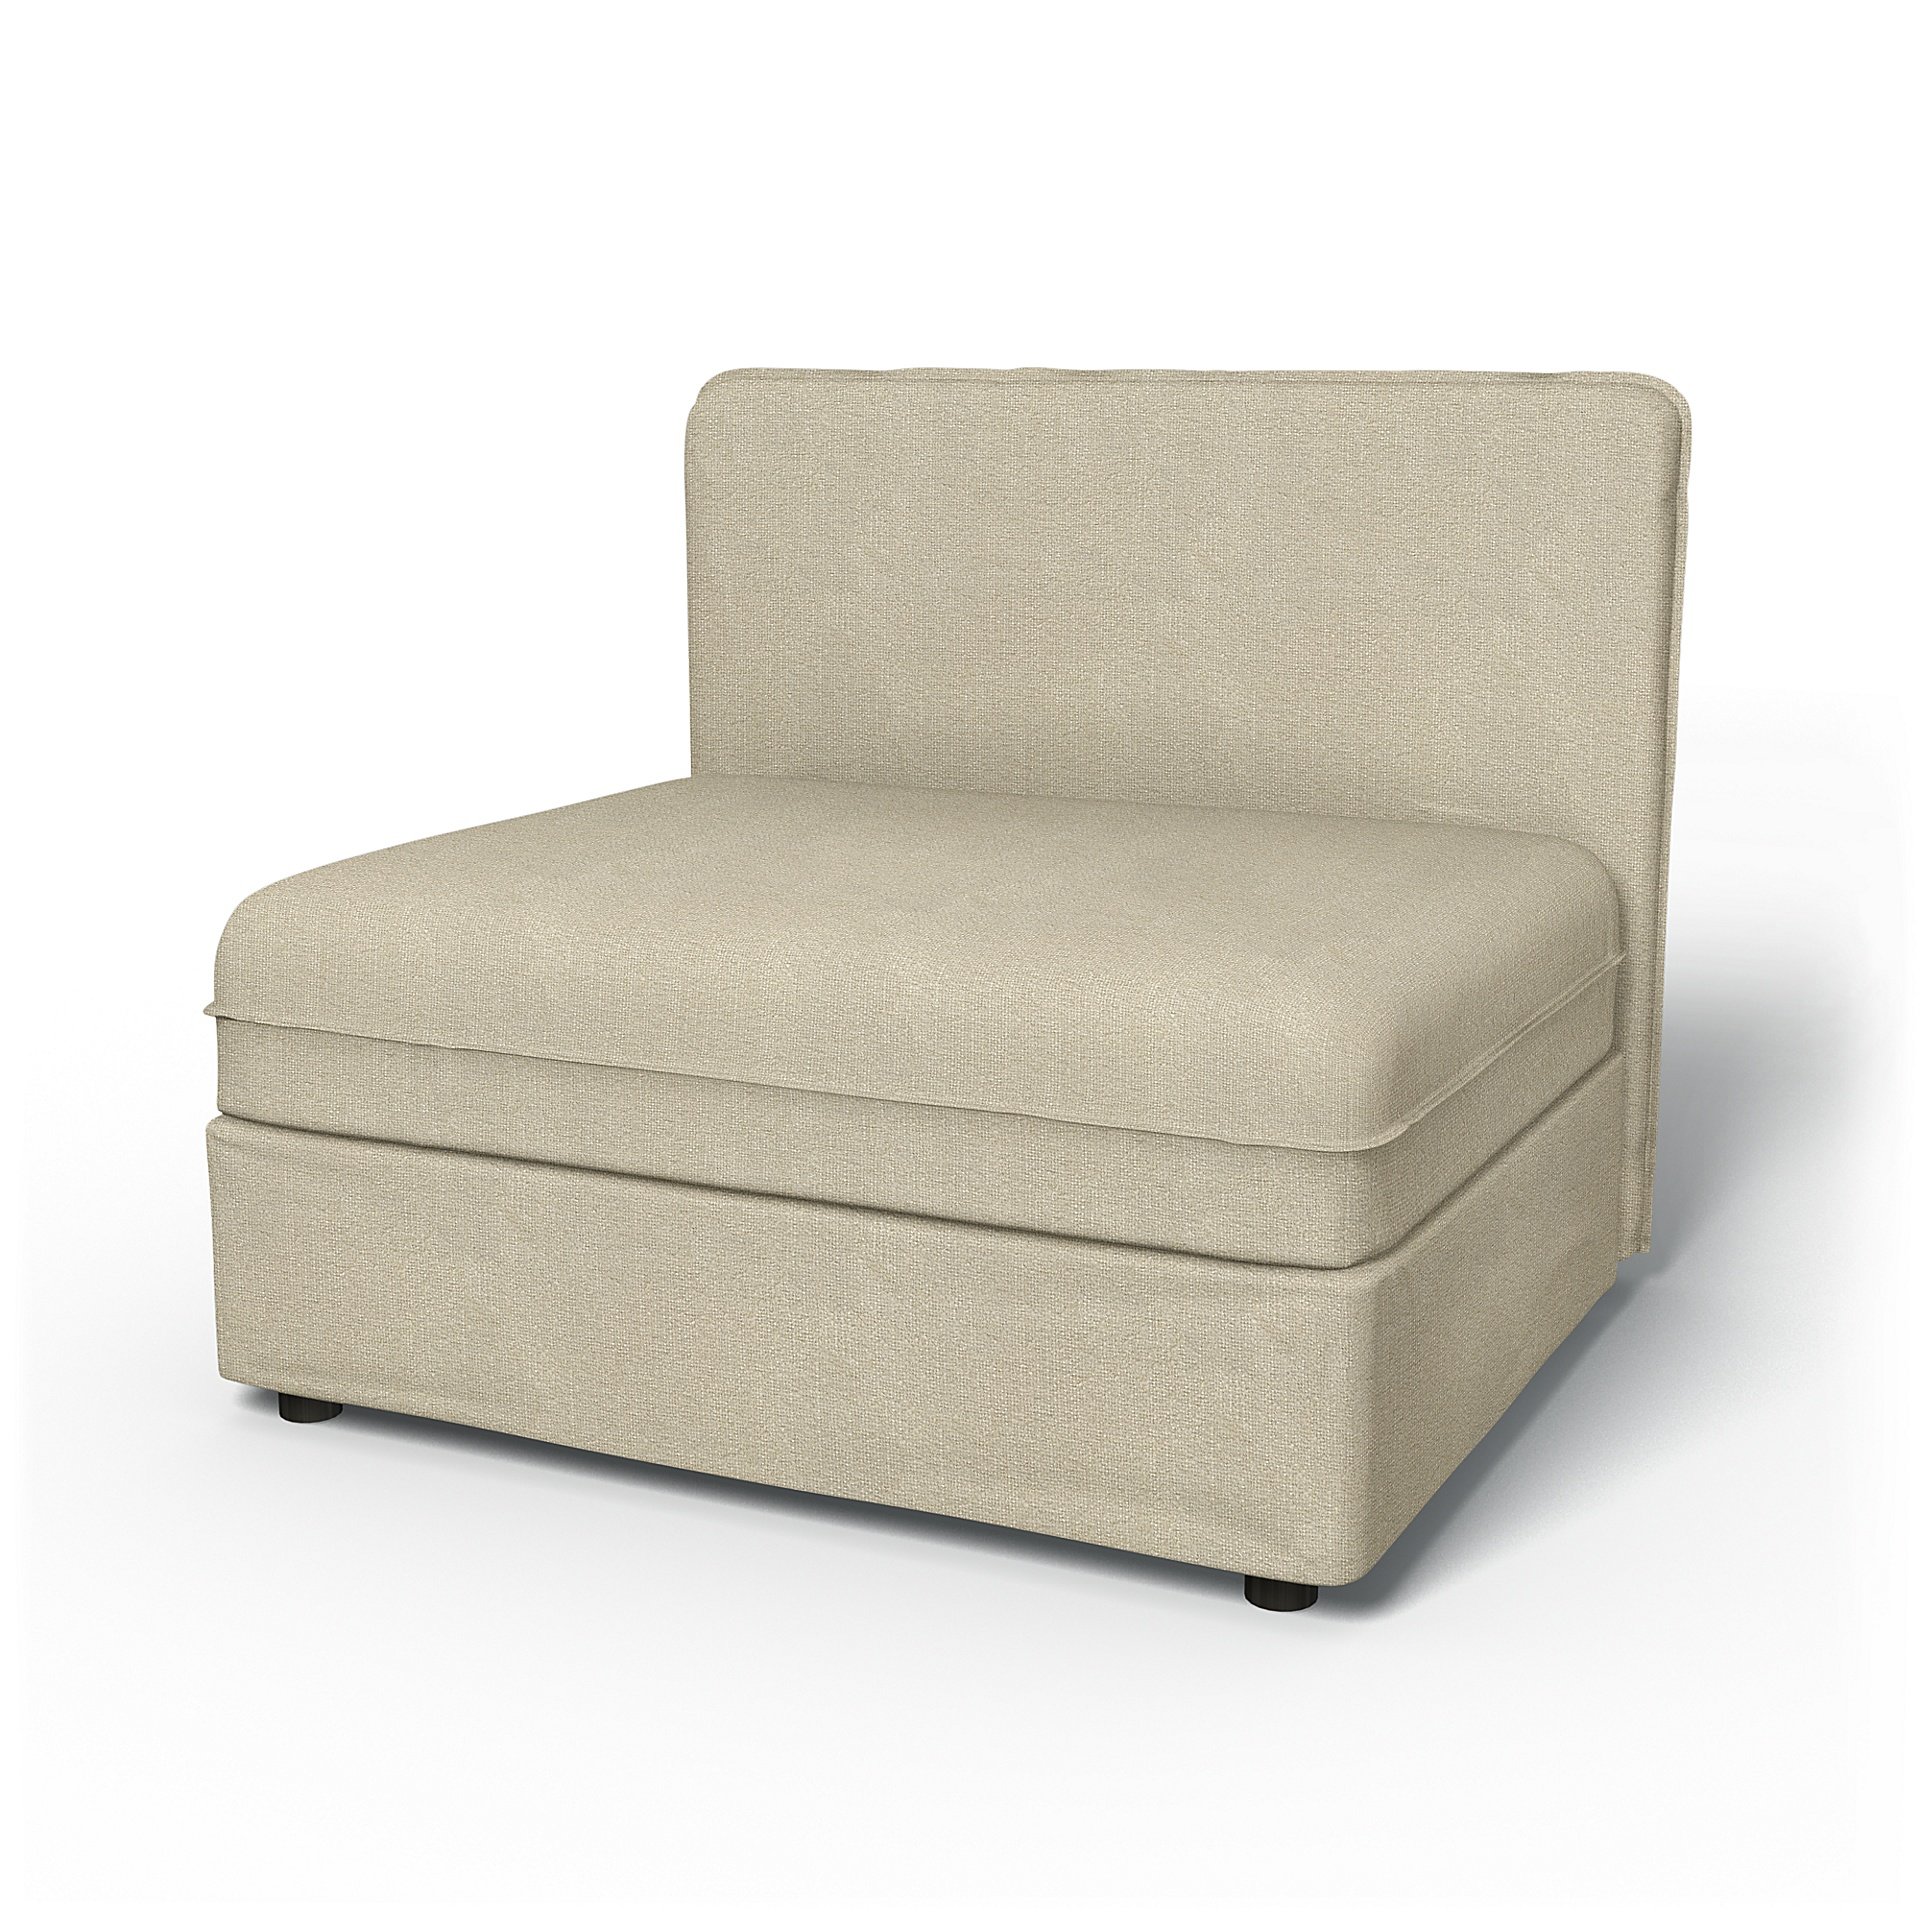 IKEA - Vallentuna Seat Module with Low Back Cover 100x80cm 39x32in, Cream, Boucle & Texture - Bemz